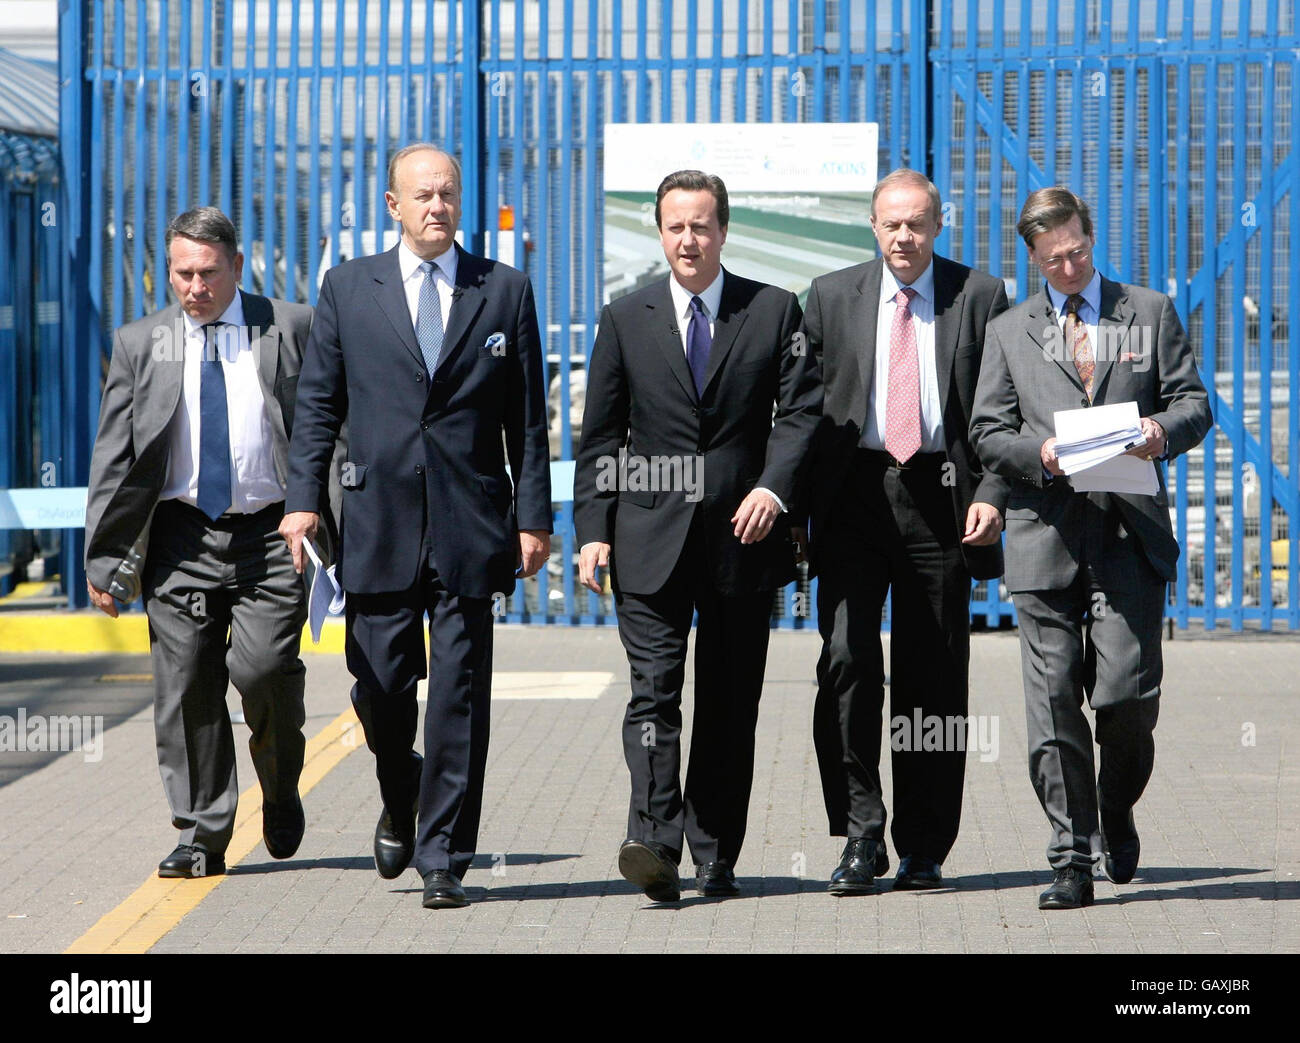 Conservative Party's leader David Cameron, Shadow Home Secretary Dominic Grieve (right), Shadow Immigration Minister Damien Green (second right), Lord Stevens and Colonel Richard Kemp (left) arrive for a press conference to launch Lord Stevens' report 'Border Protection Service for the UK: Policy Proposals' at London City Airport. Stock Photo